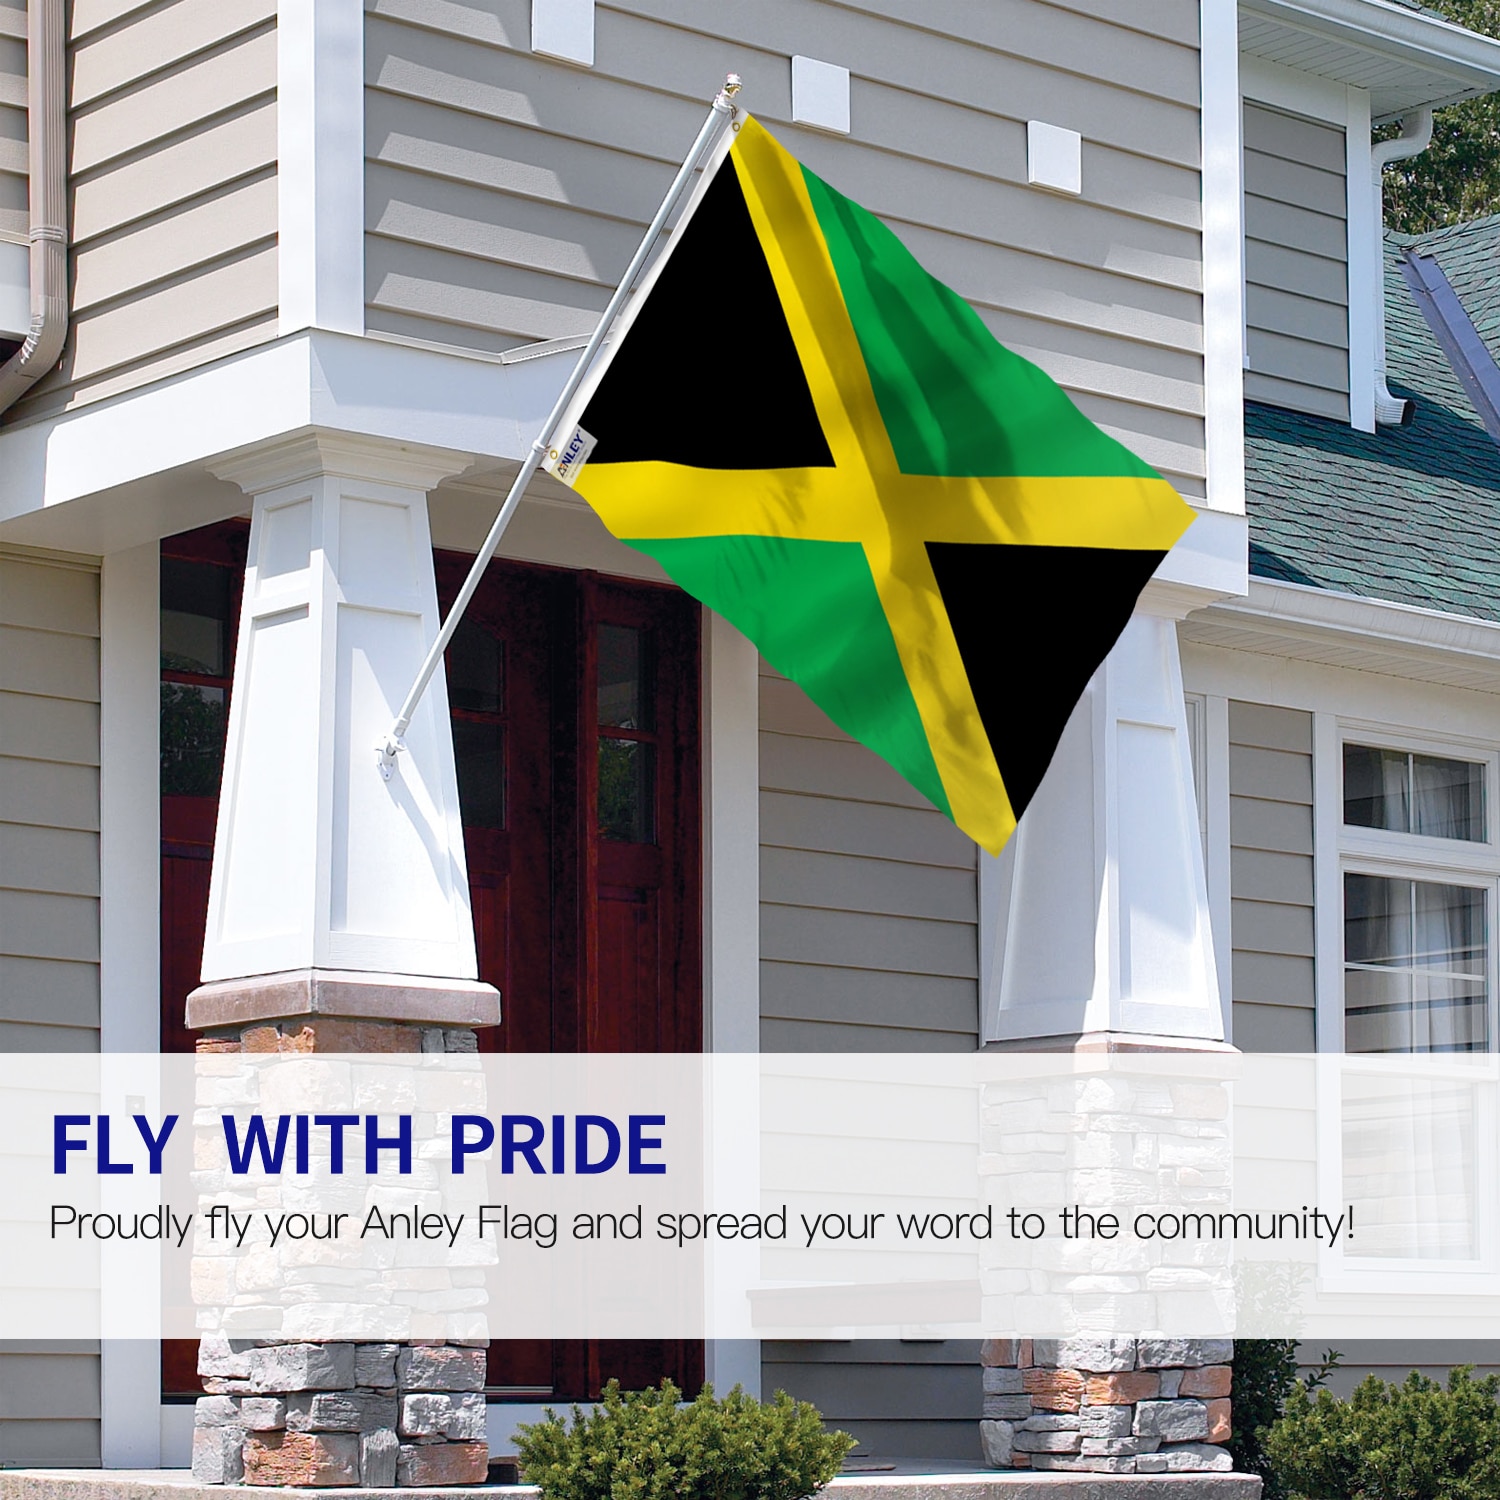 Jamaica Jamaican Flag 3x5 Polyester Indoor Outdoor Flag House Banner 